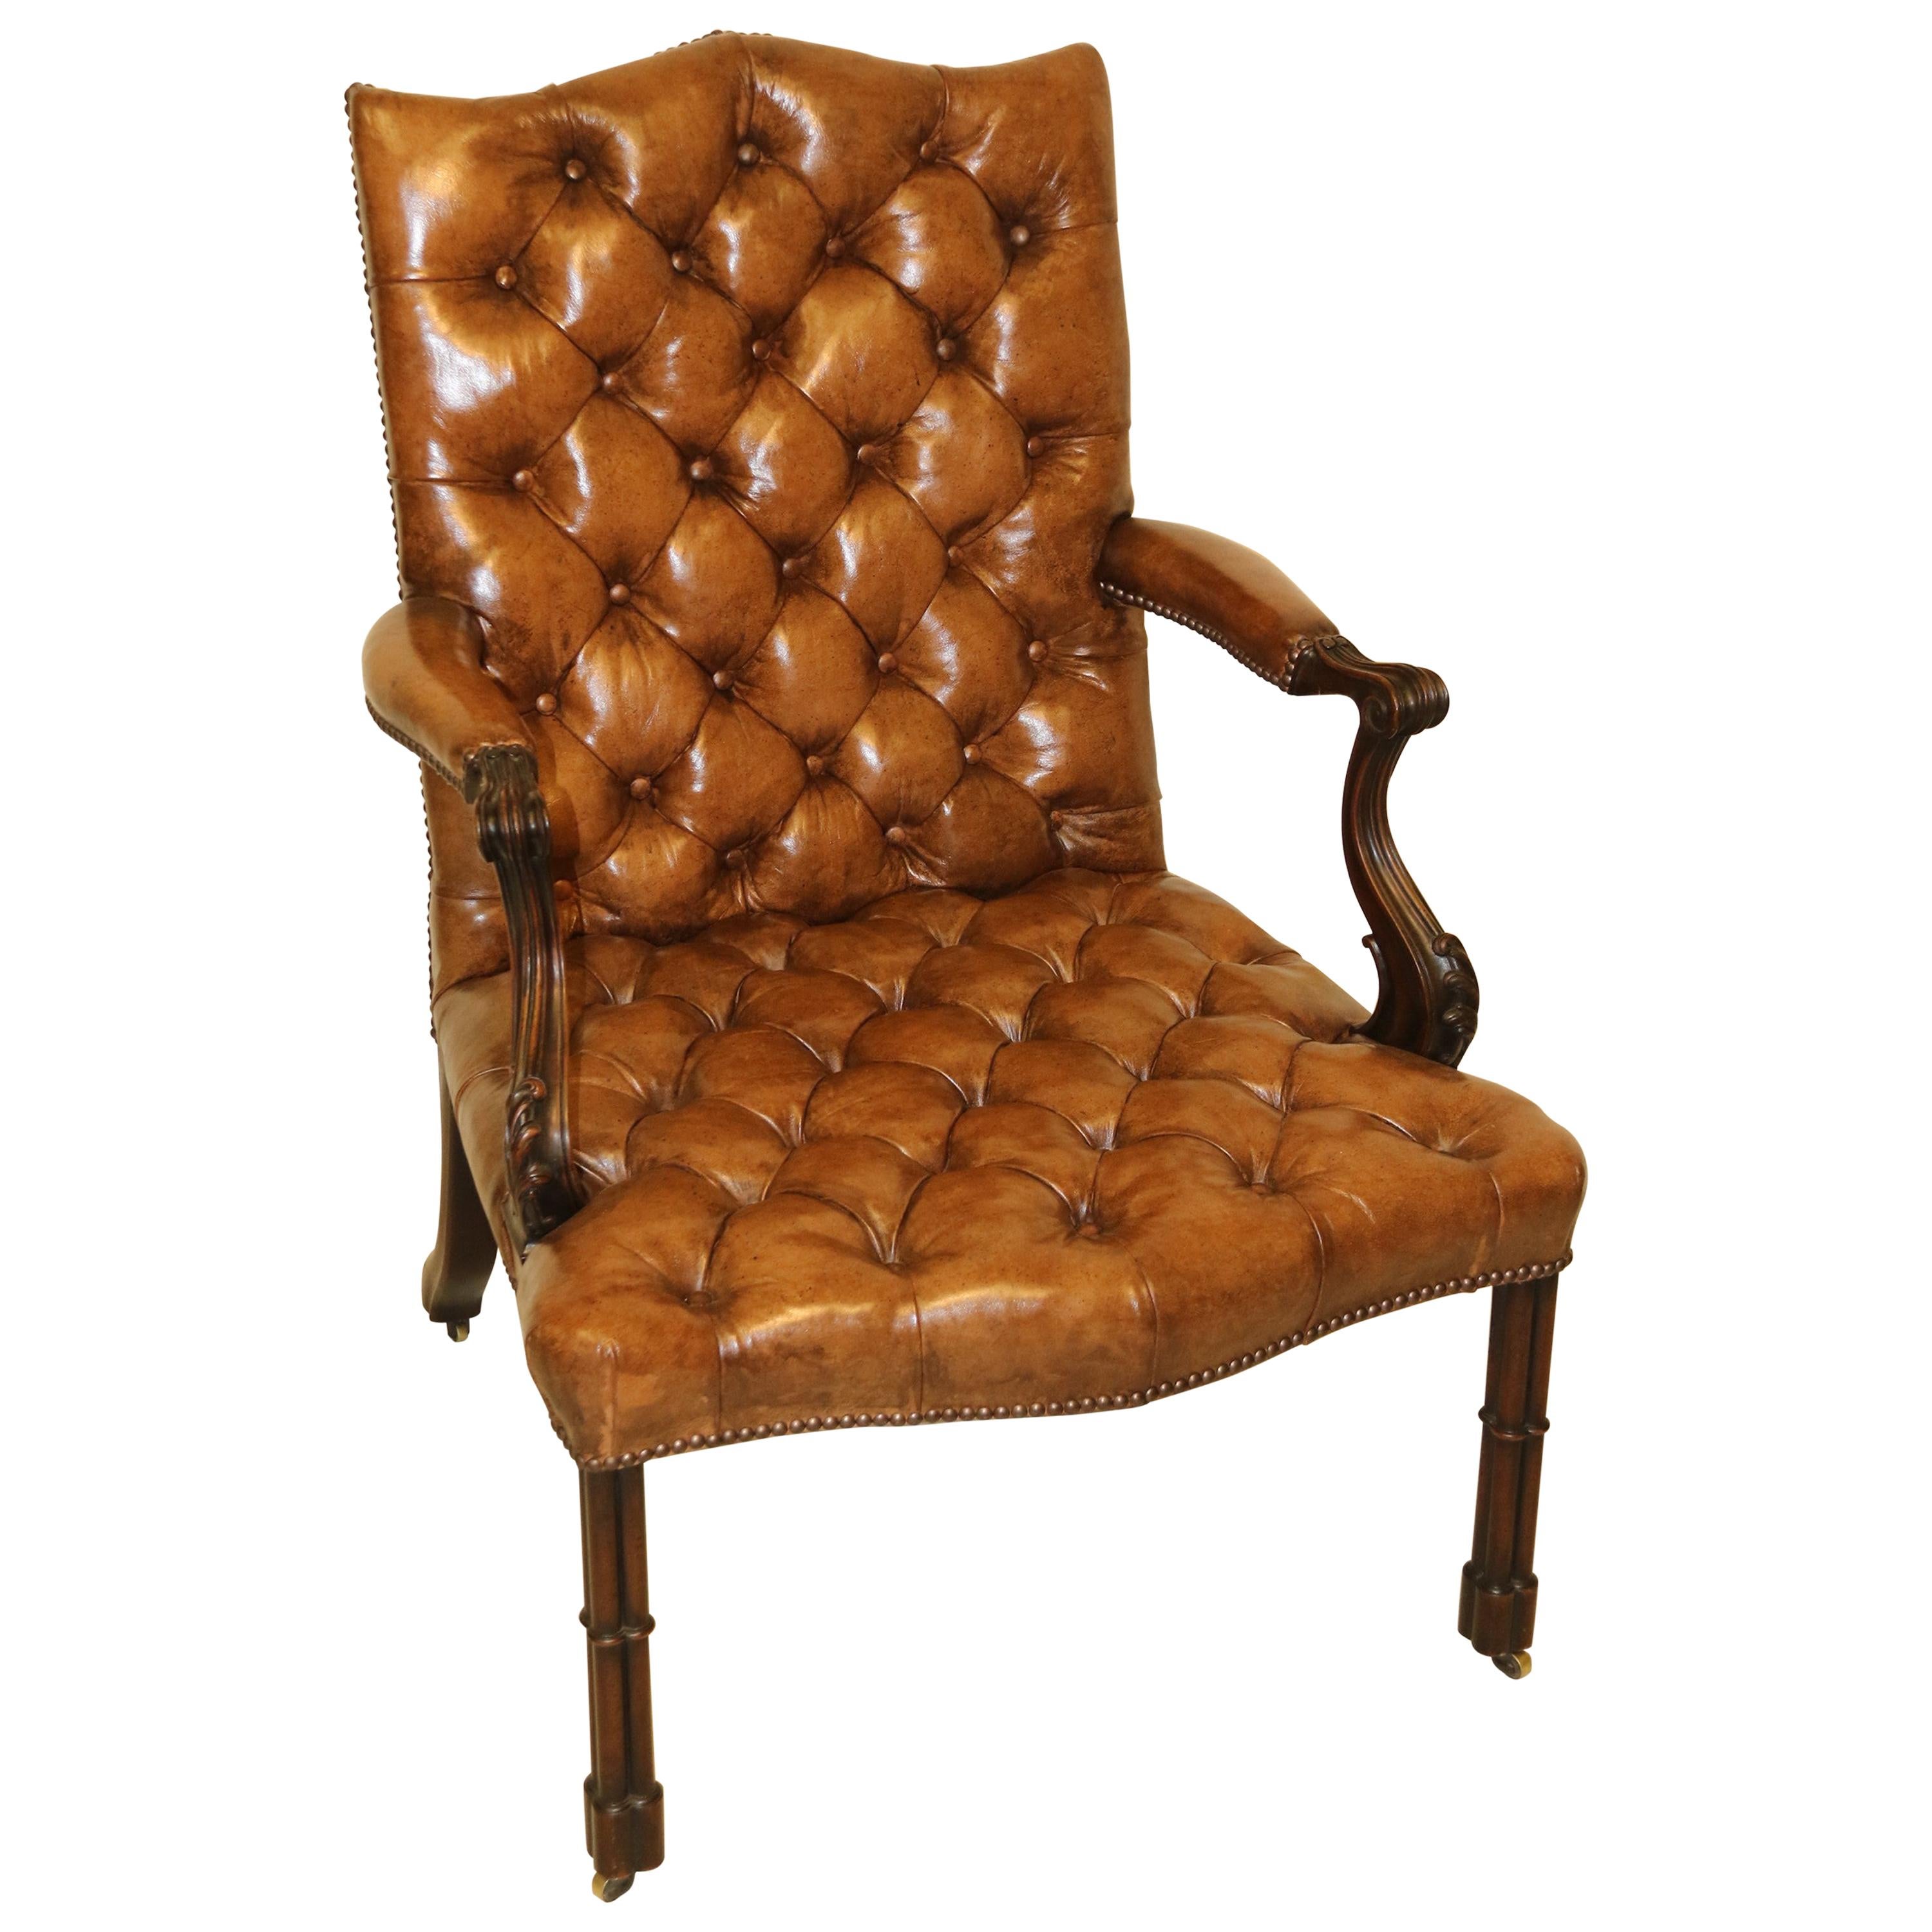 English Chippendale Style Leather Upholstered Gainsborough Type Armchair For Sale